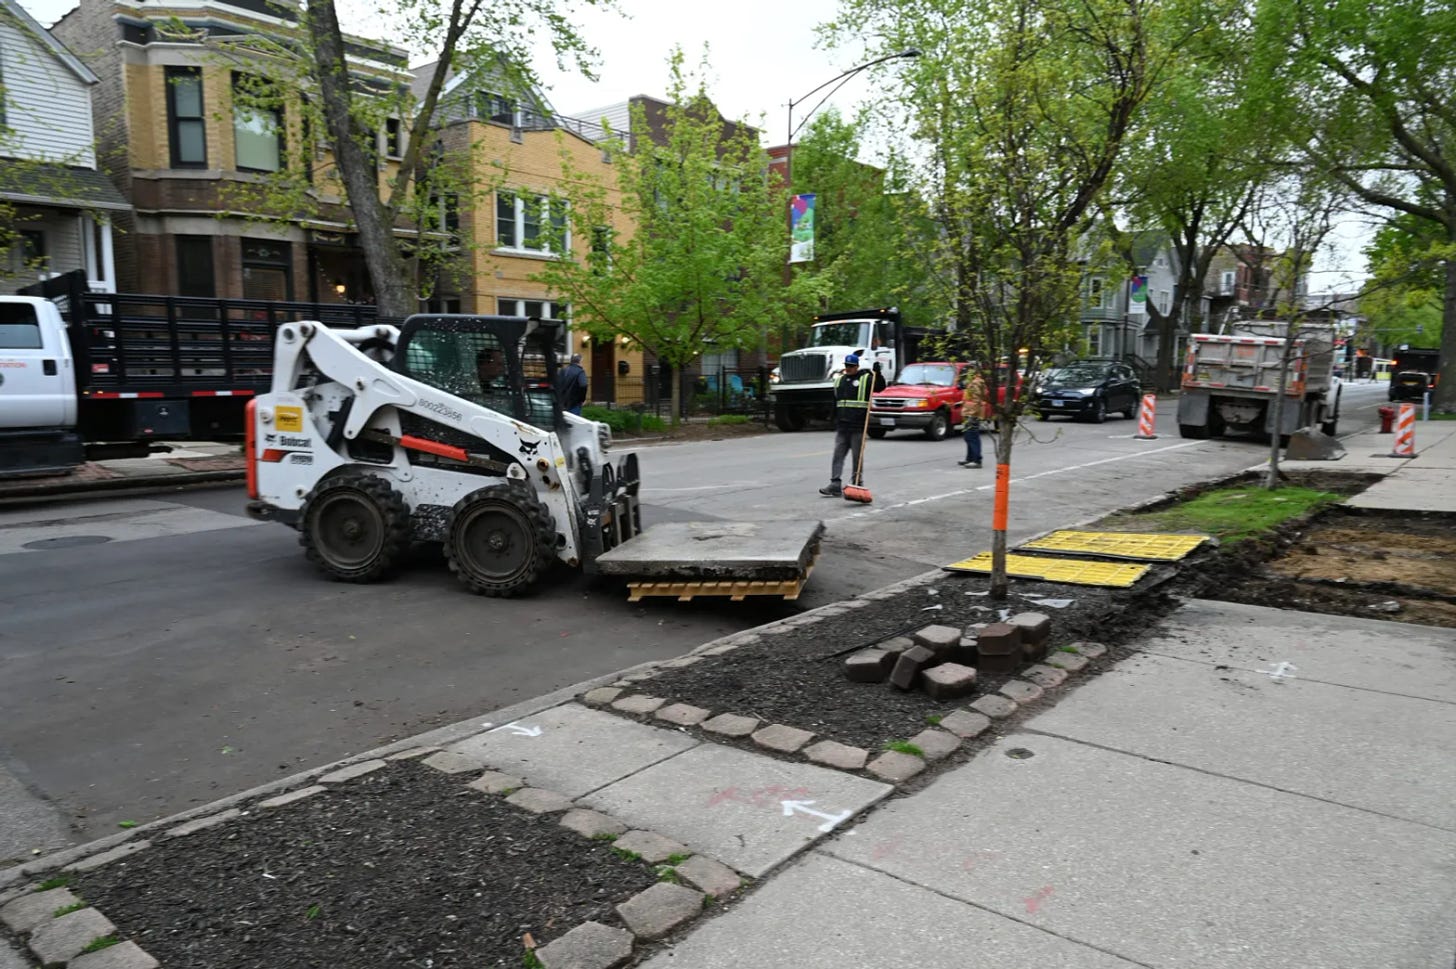 A city street in Chicago. A bobcat has the entire concrete slab containing the rat hole on the front and is wheeling it away from its original location. That area is now a dirt patch in the sidewalk.